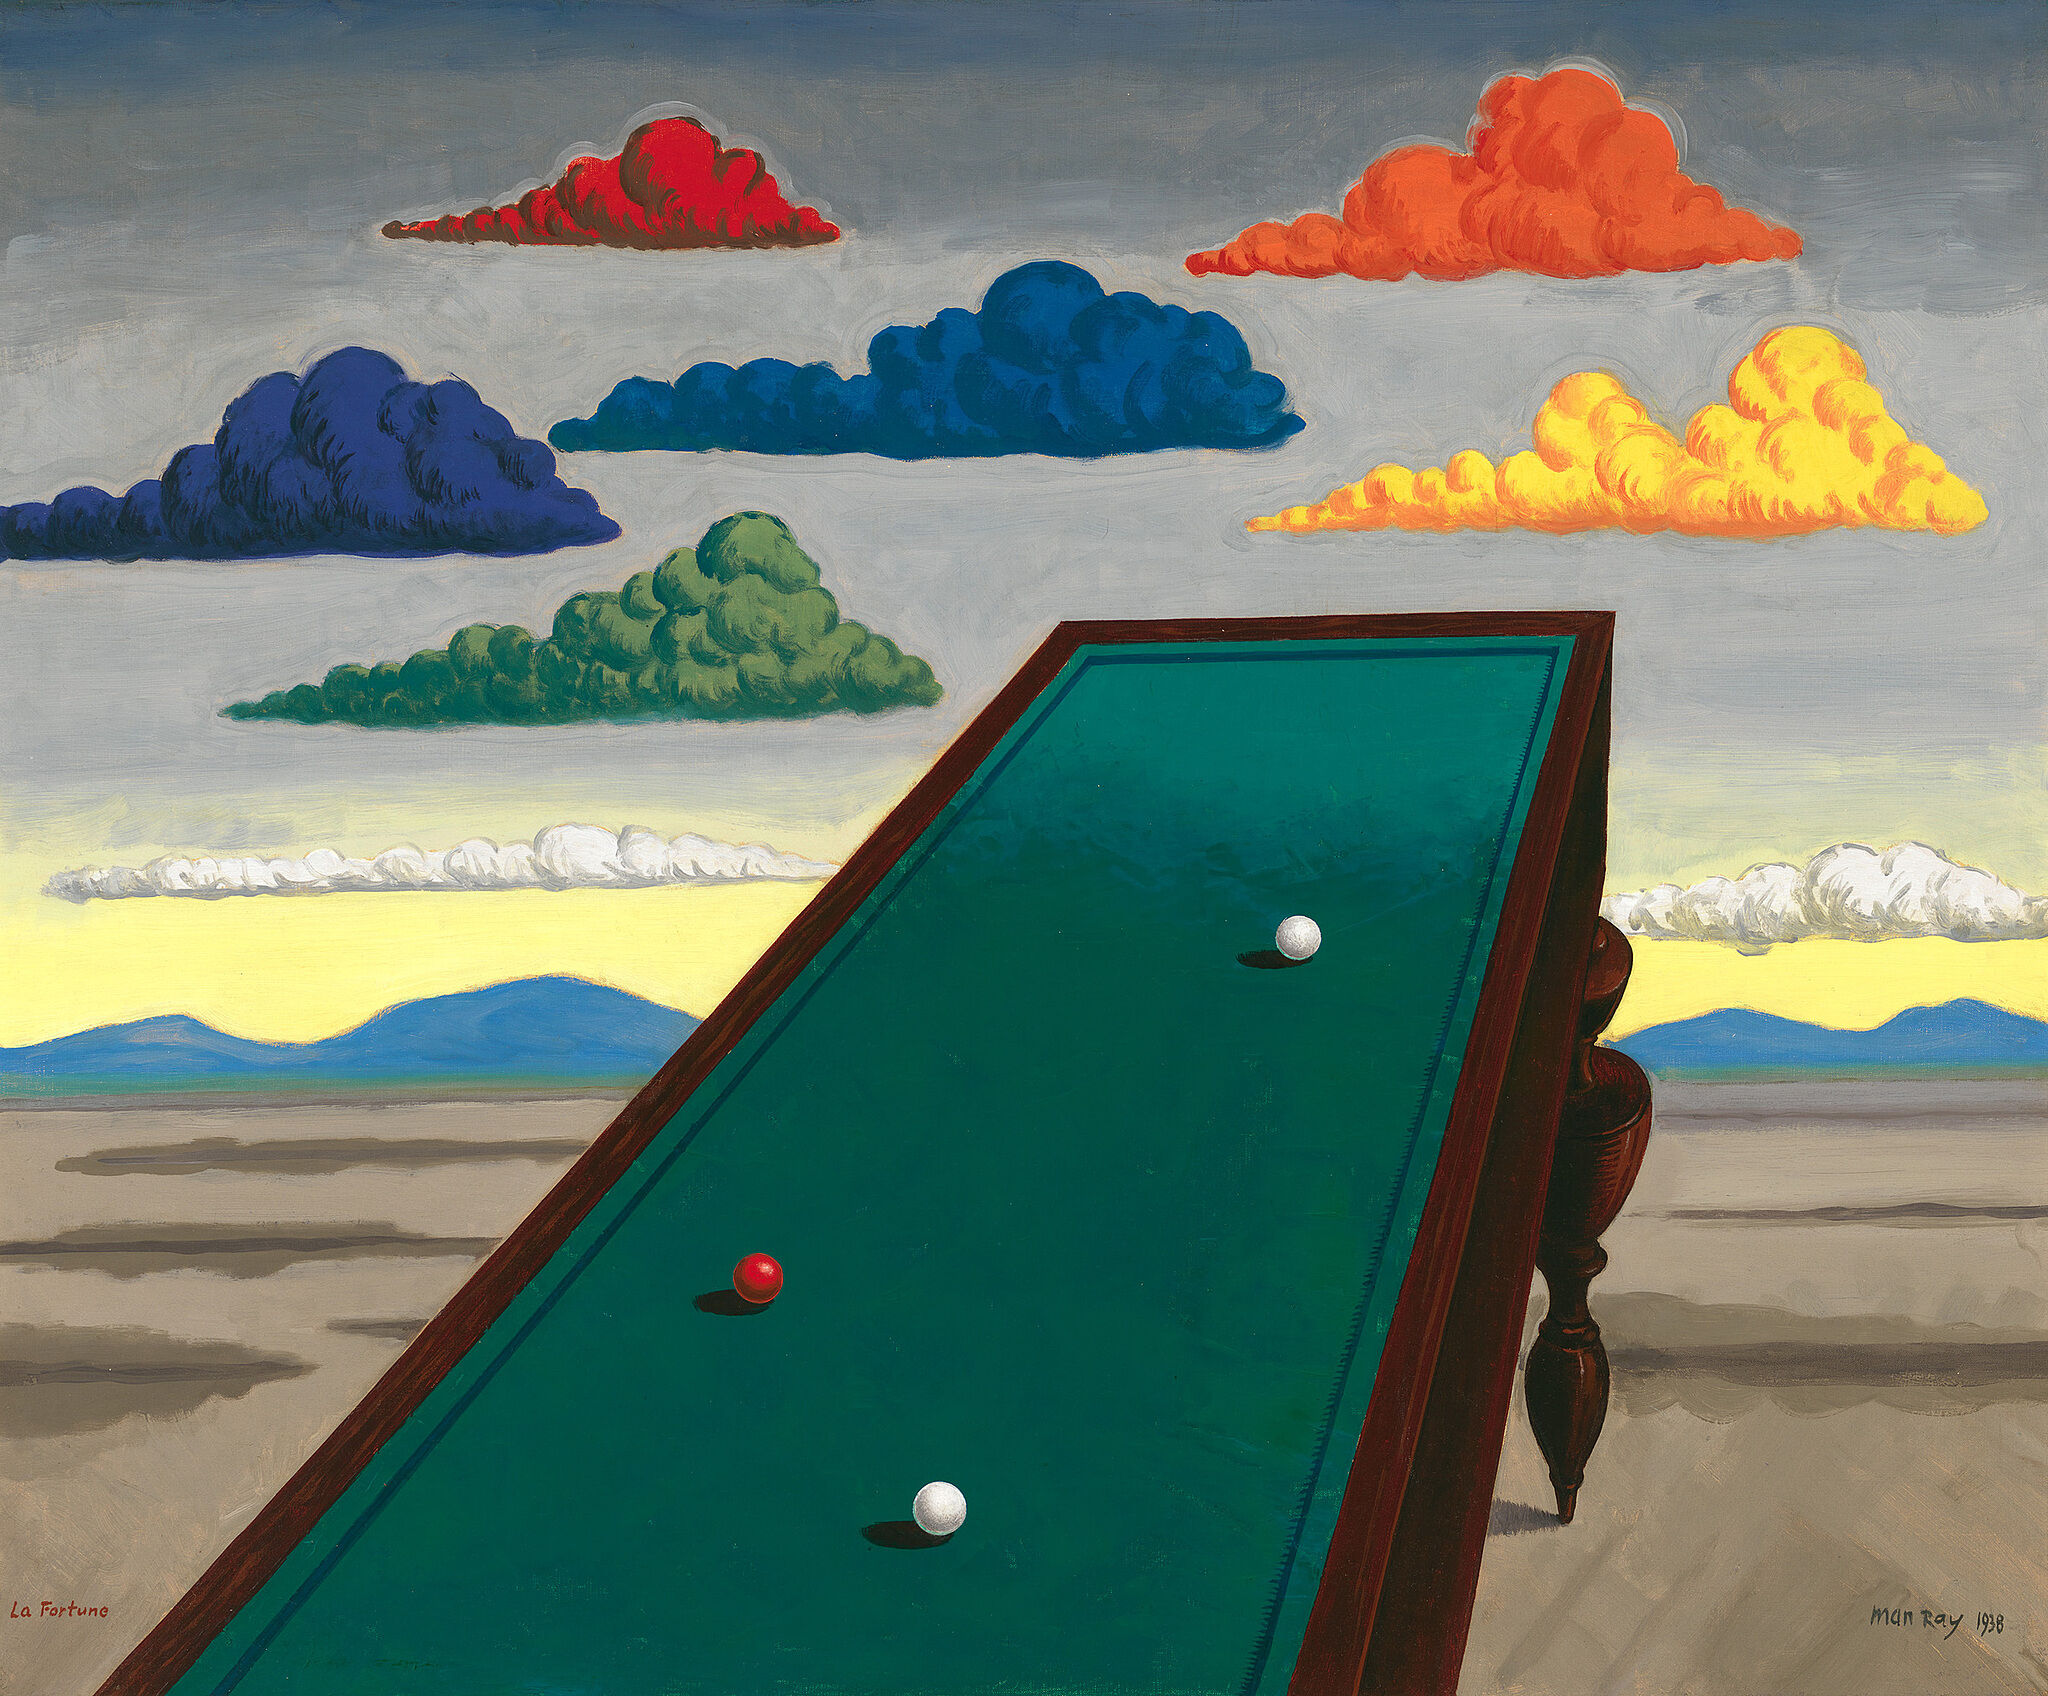 A billiards table sits in the desert angled towards a sky filled with with clouds of starkly different colors. There is a blue mountain range in the distance.